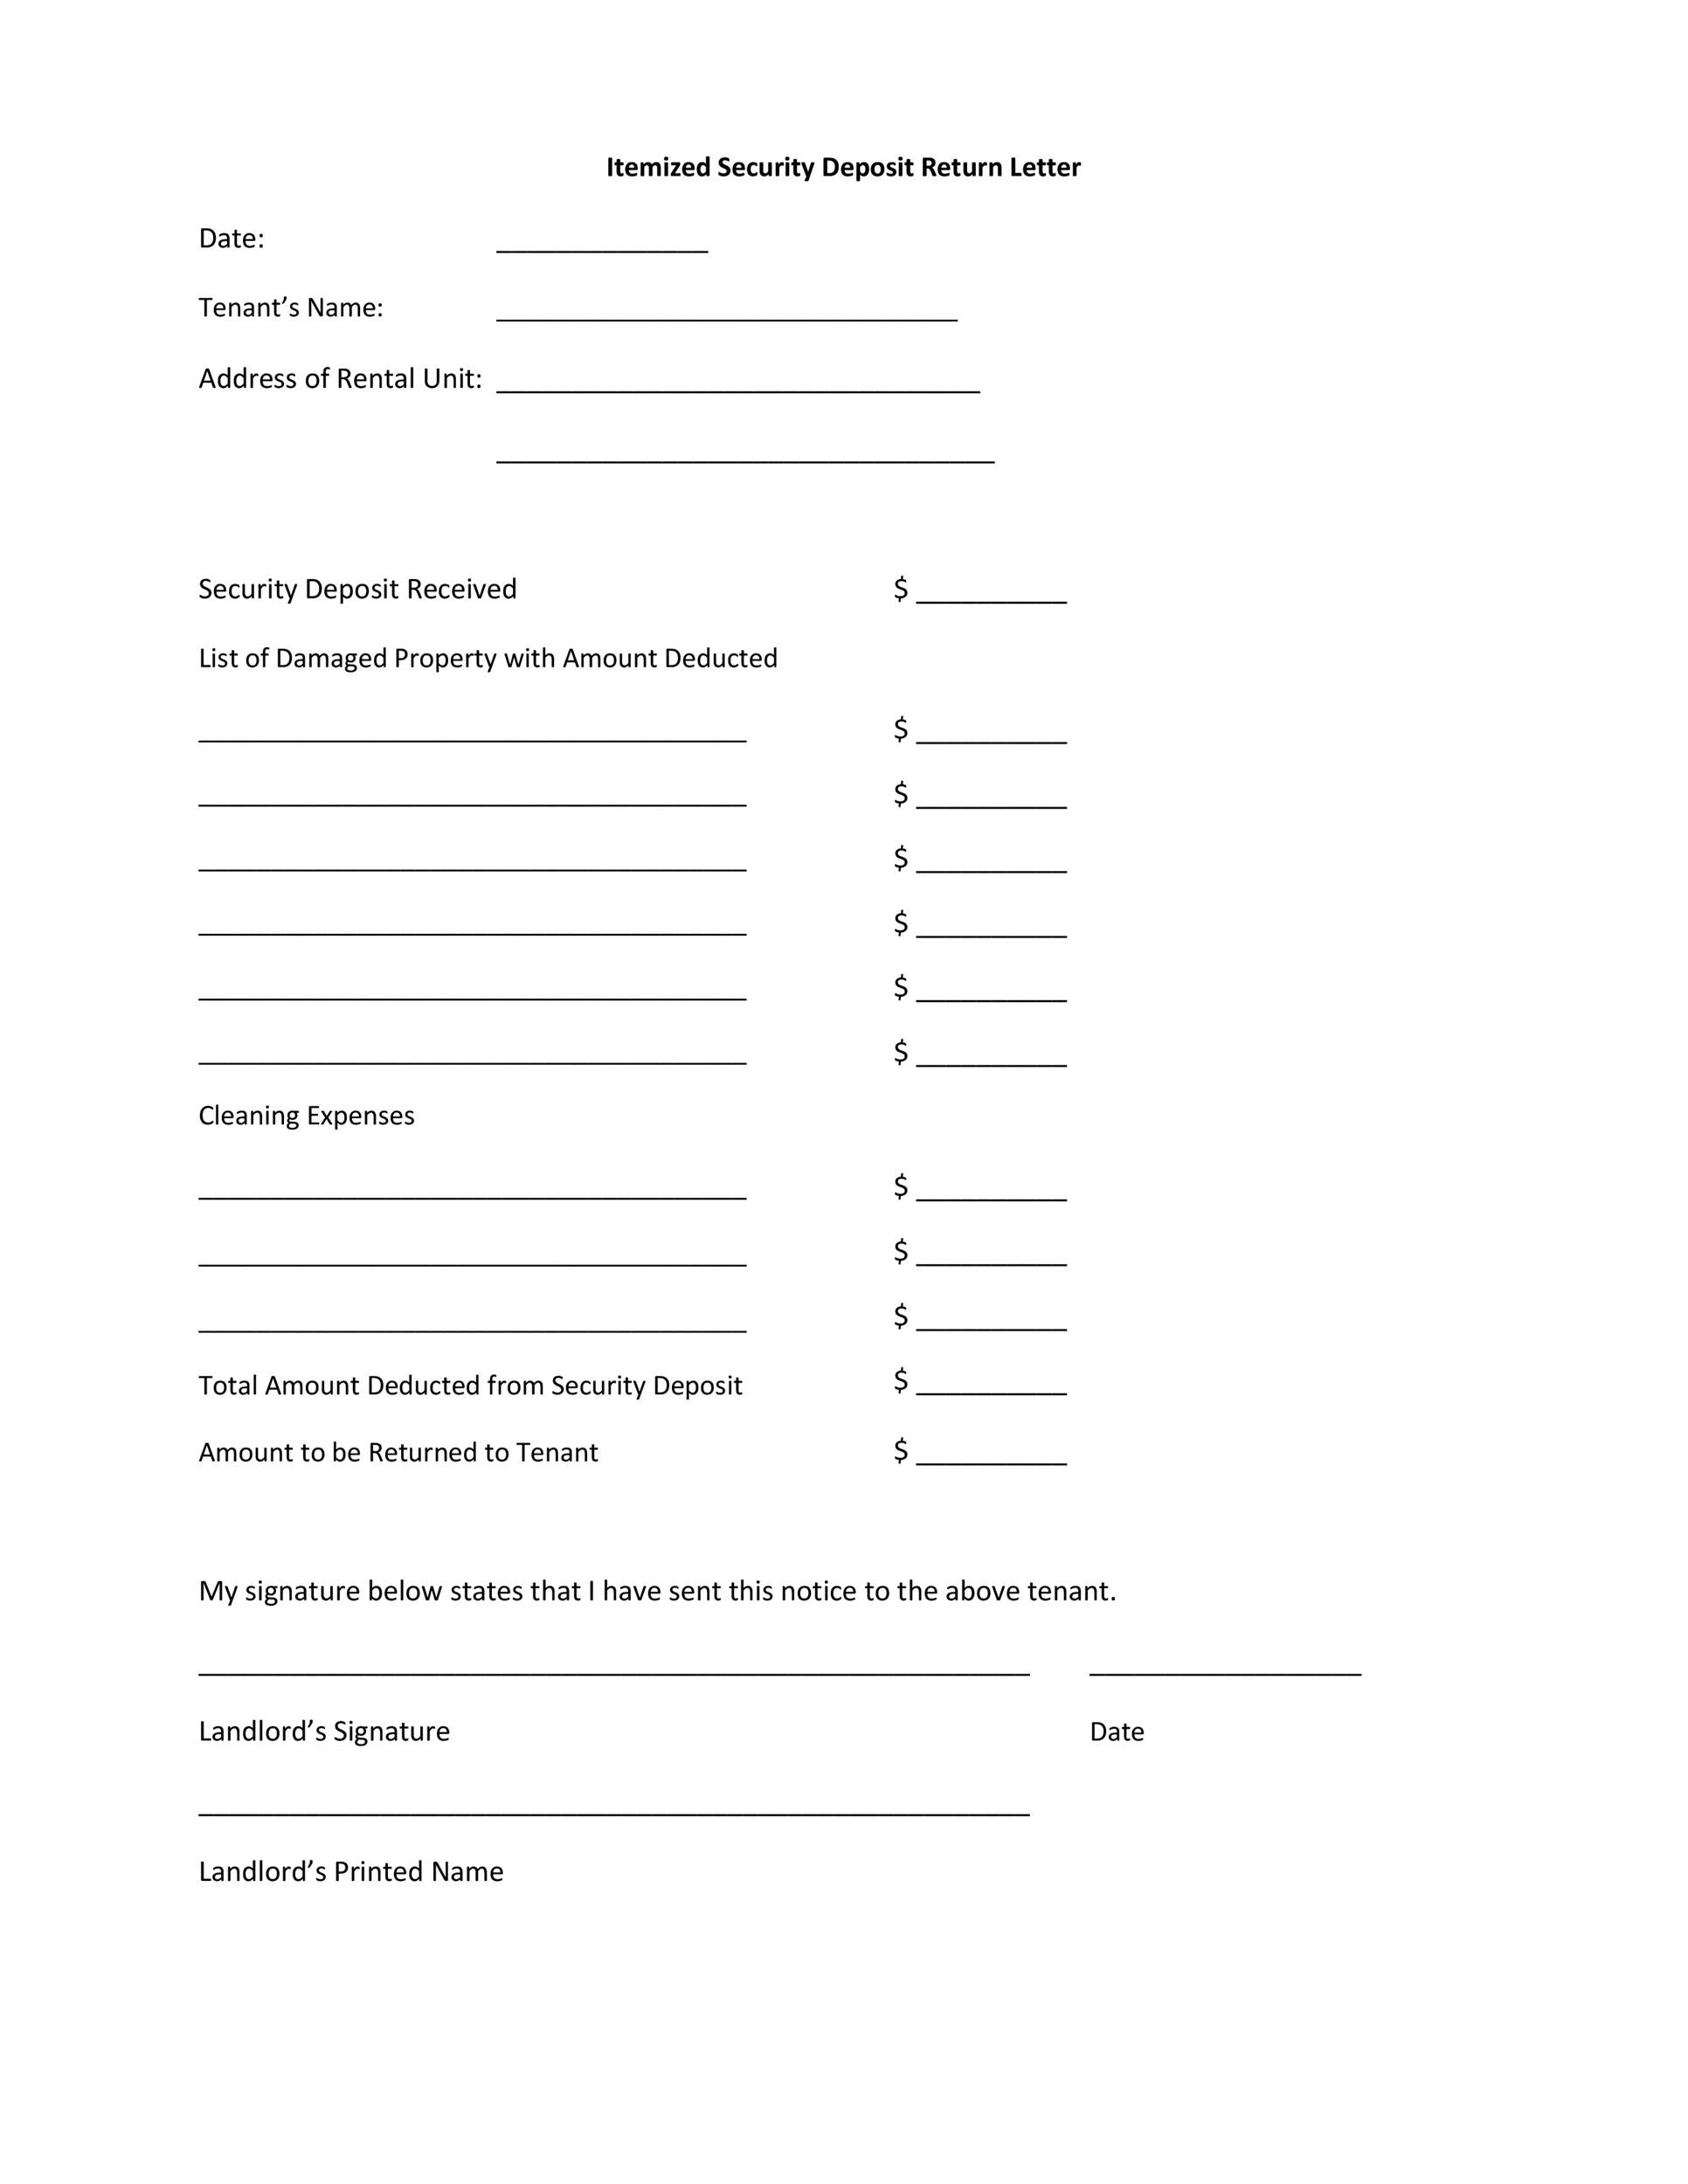 10 Effective Security Deposit Return Letters [MS Word] ᐅ TemplateLab Intended For Security Deposit Refund Letter Template Intended For Security Deposit Refund Letter Template